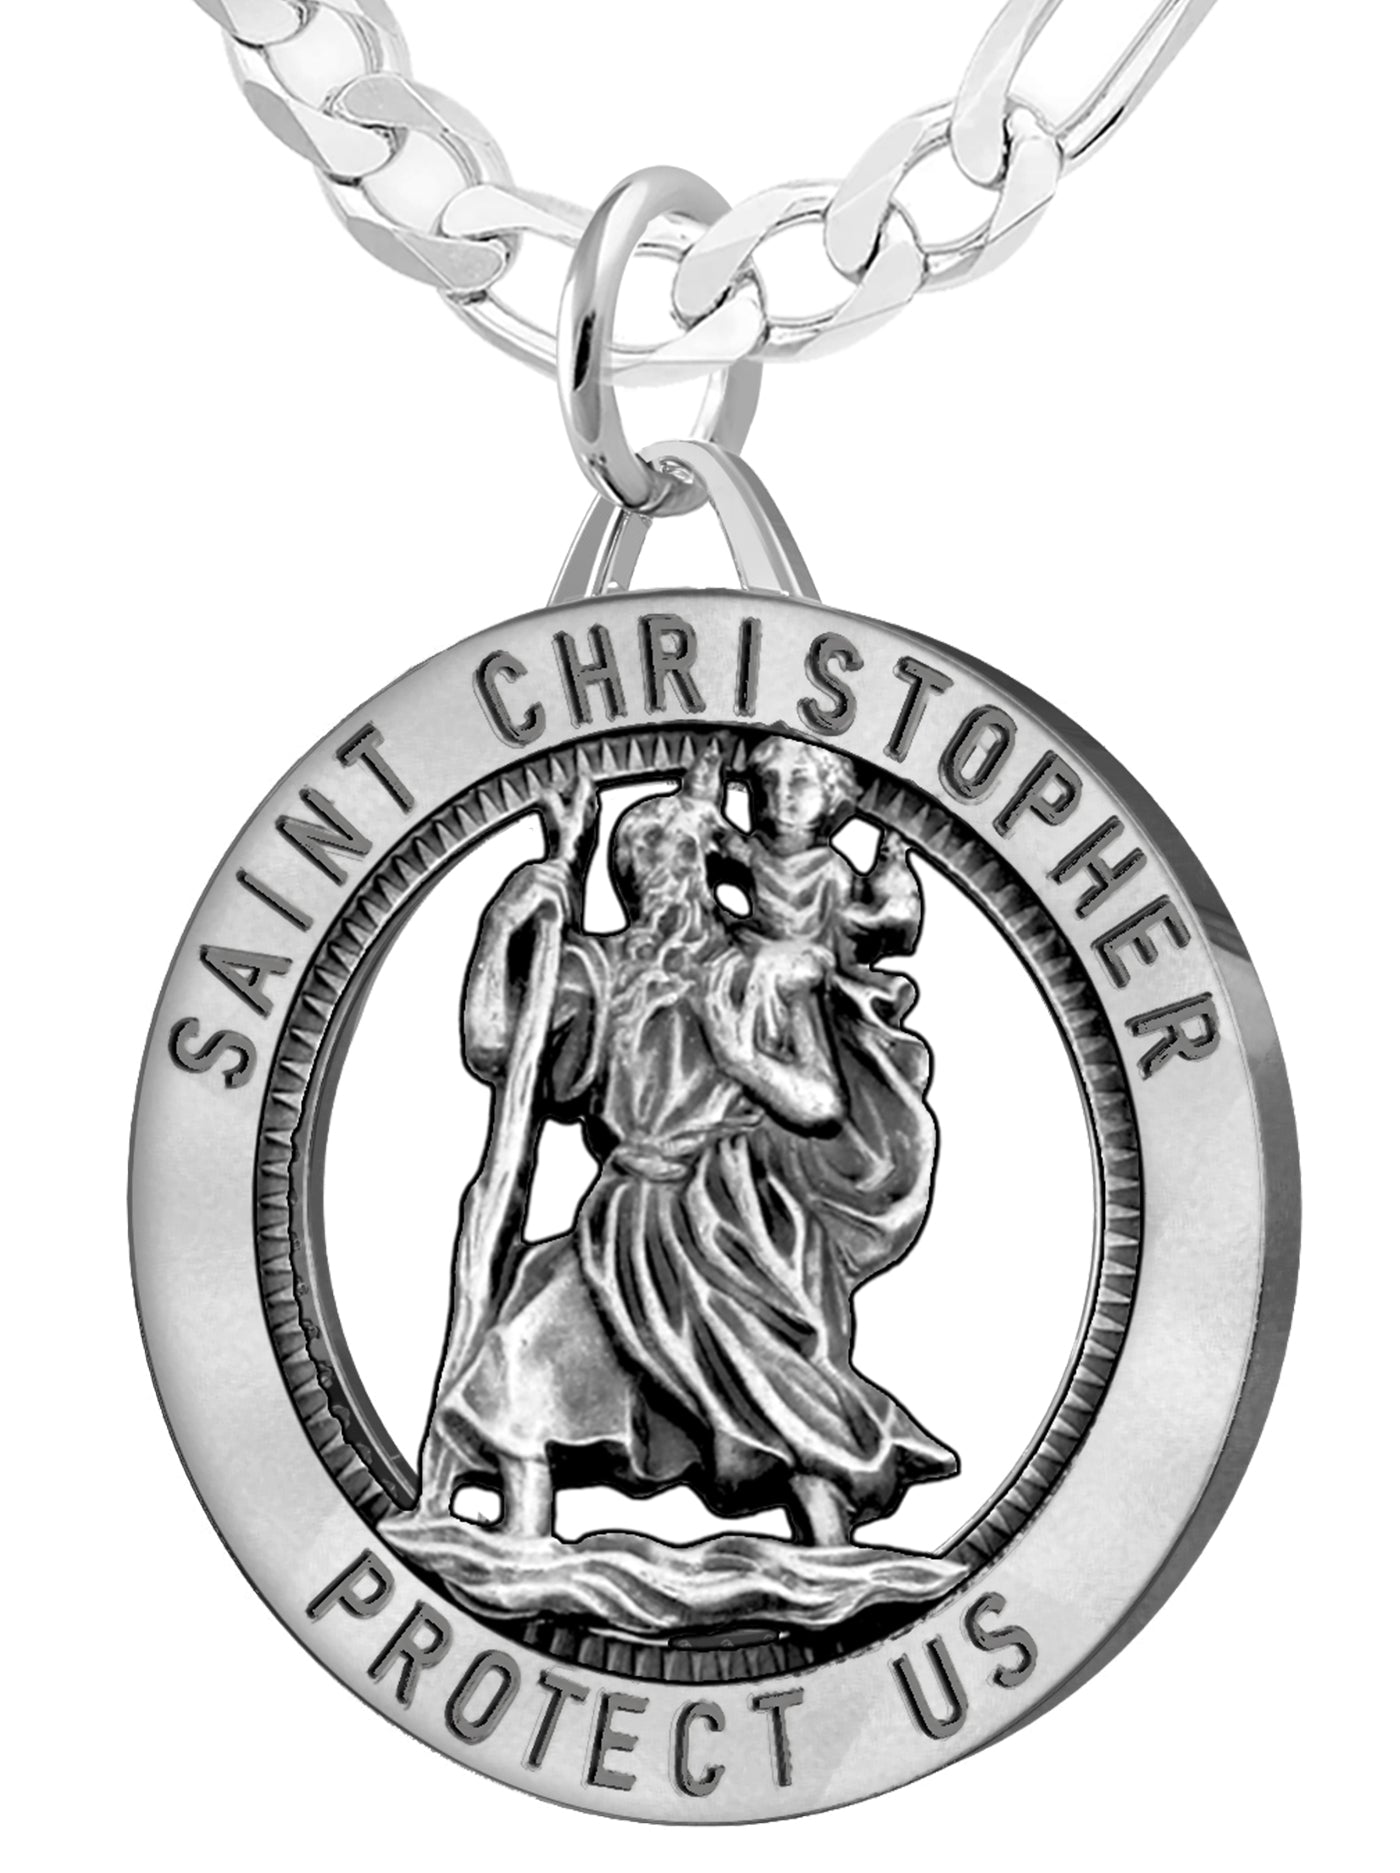 Round 925 Sterling Silver St. Christopher Protect Us Pendant with Twisted  Rope Frame - Paul's Jewelry-Jewelry is Personal.